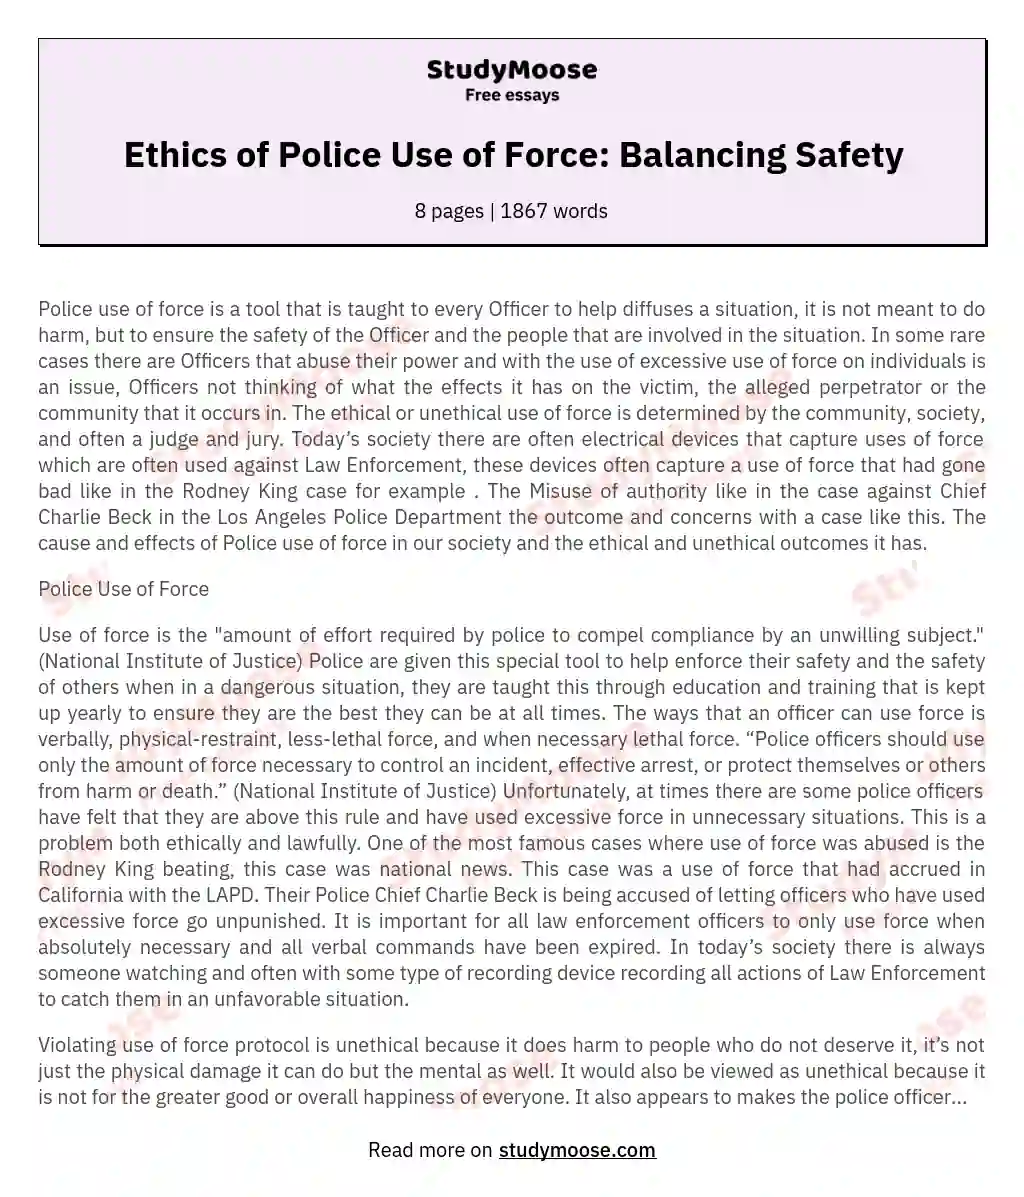 Ethics of Police Use of Force: Balancing Safety essay